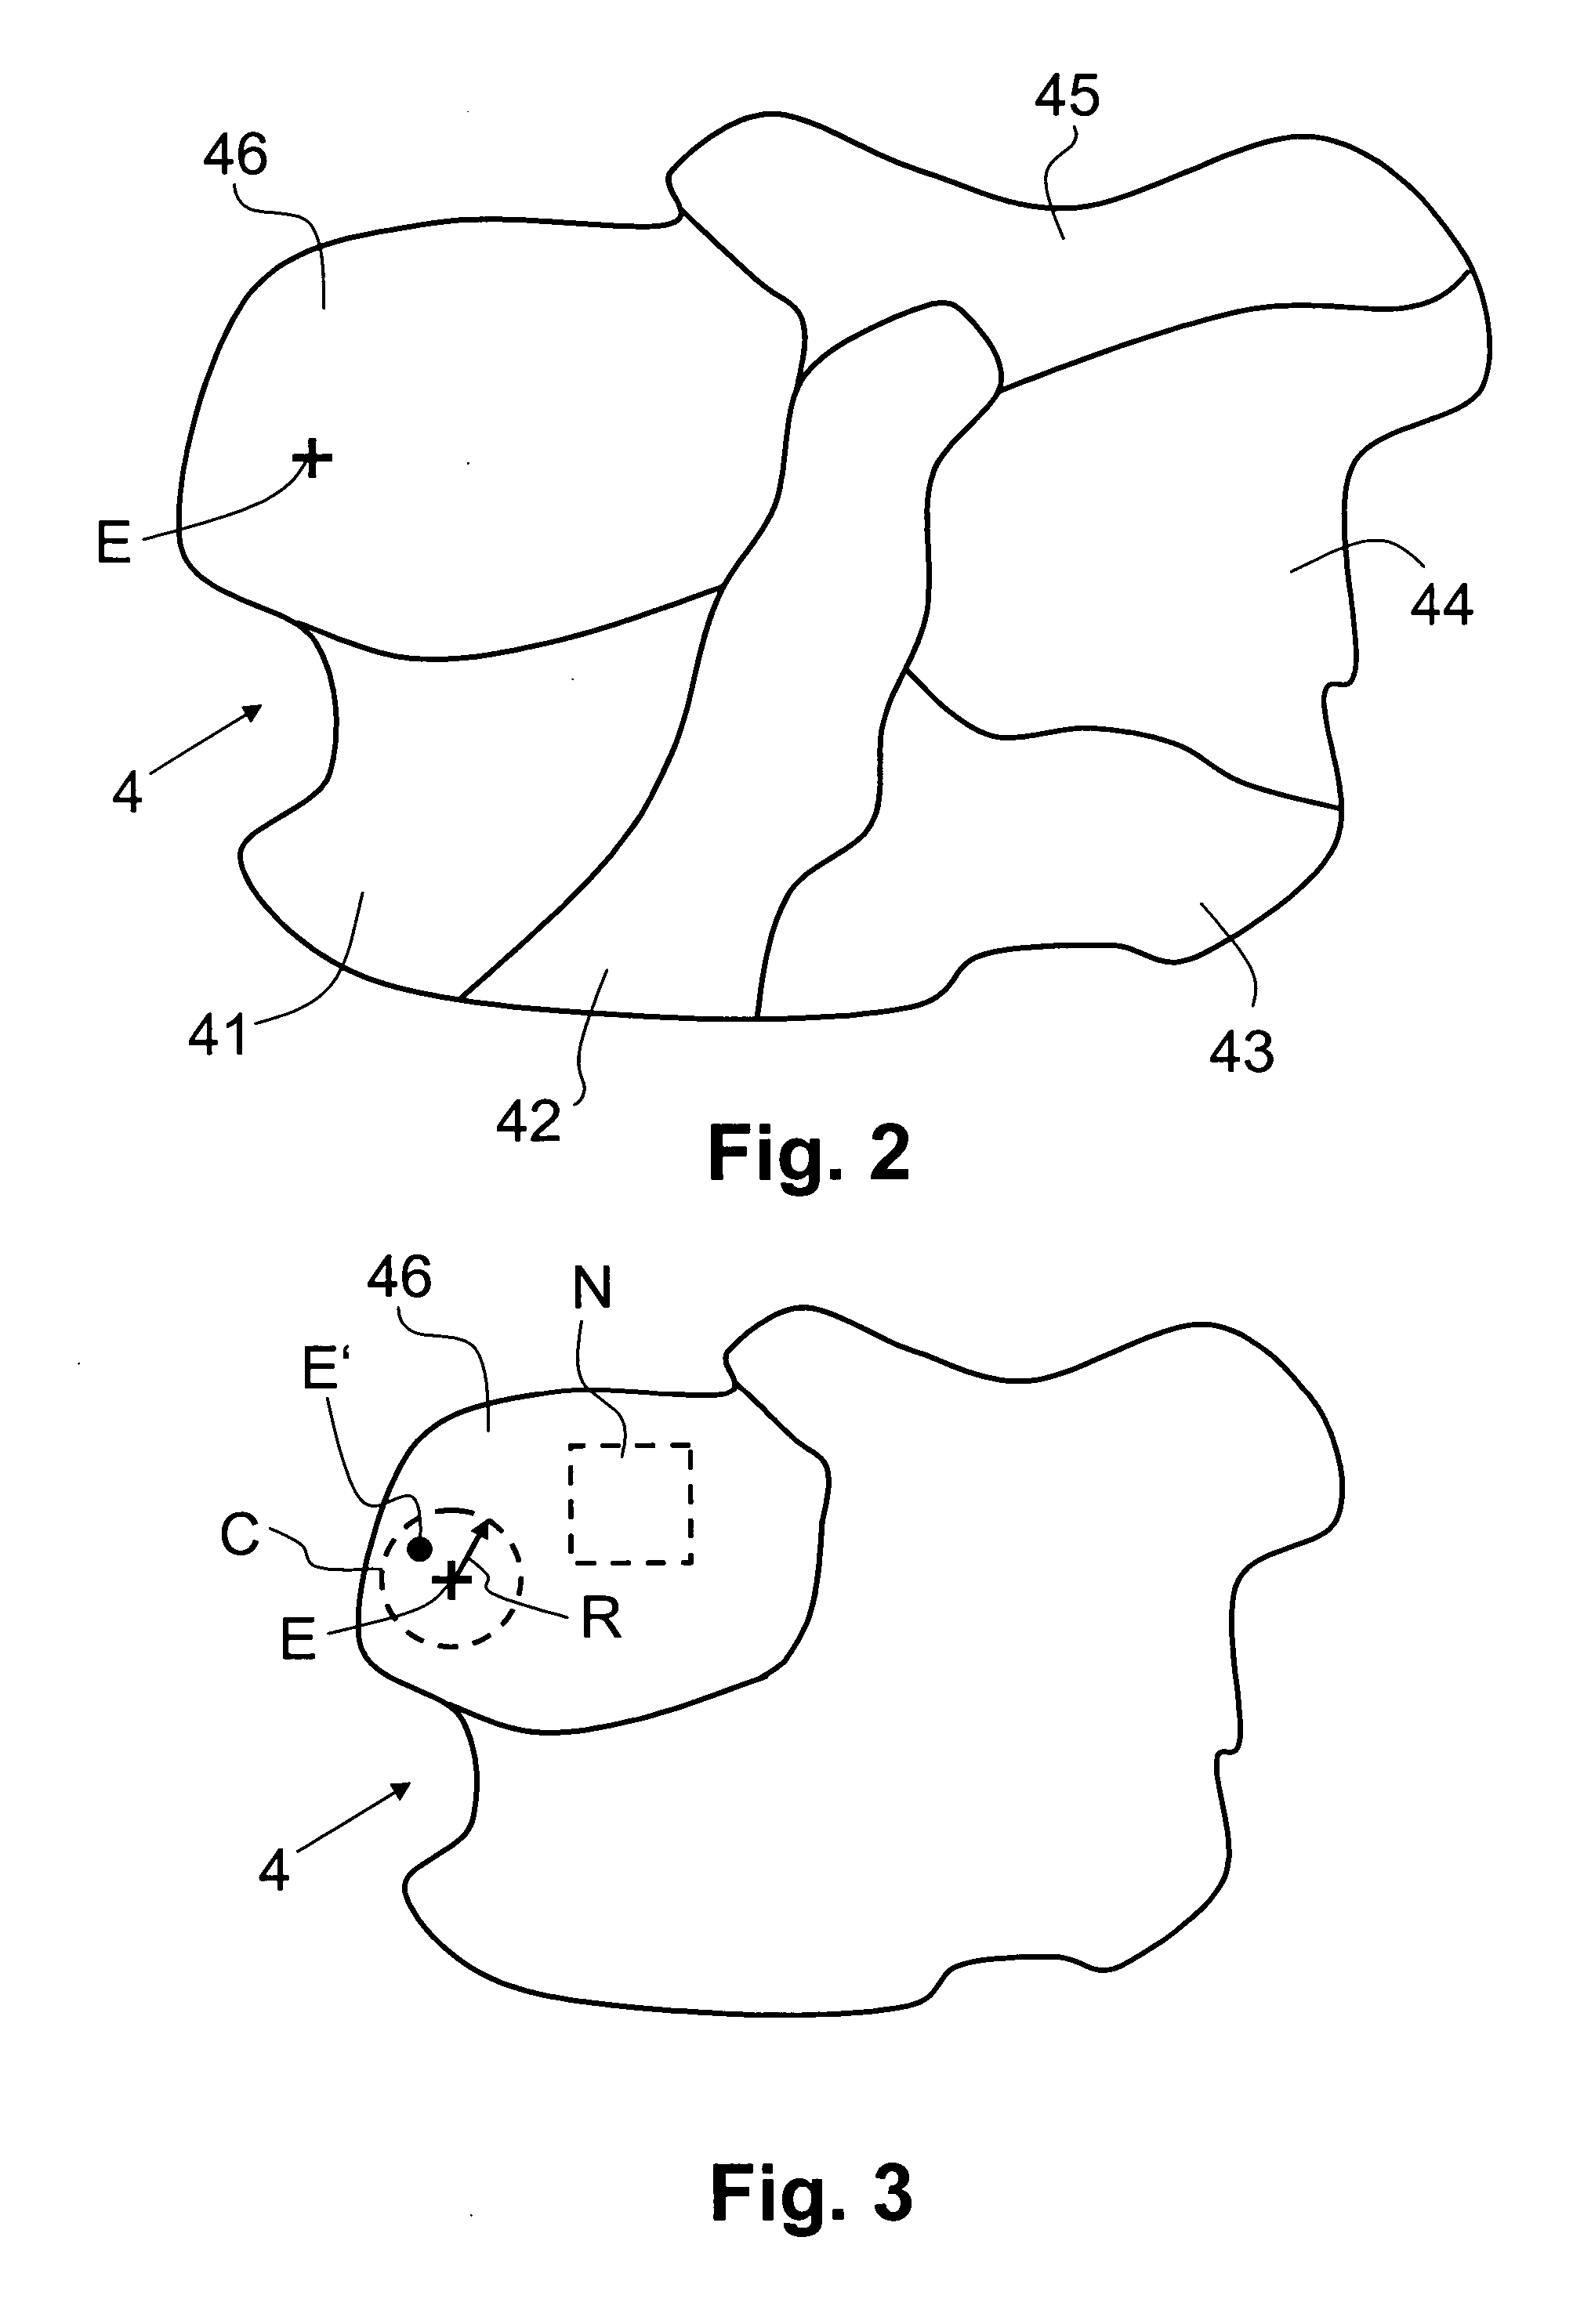 System and method for providing earthquake data